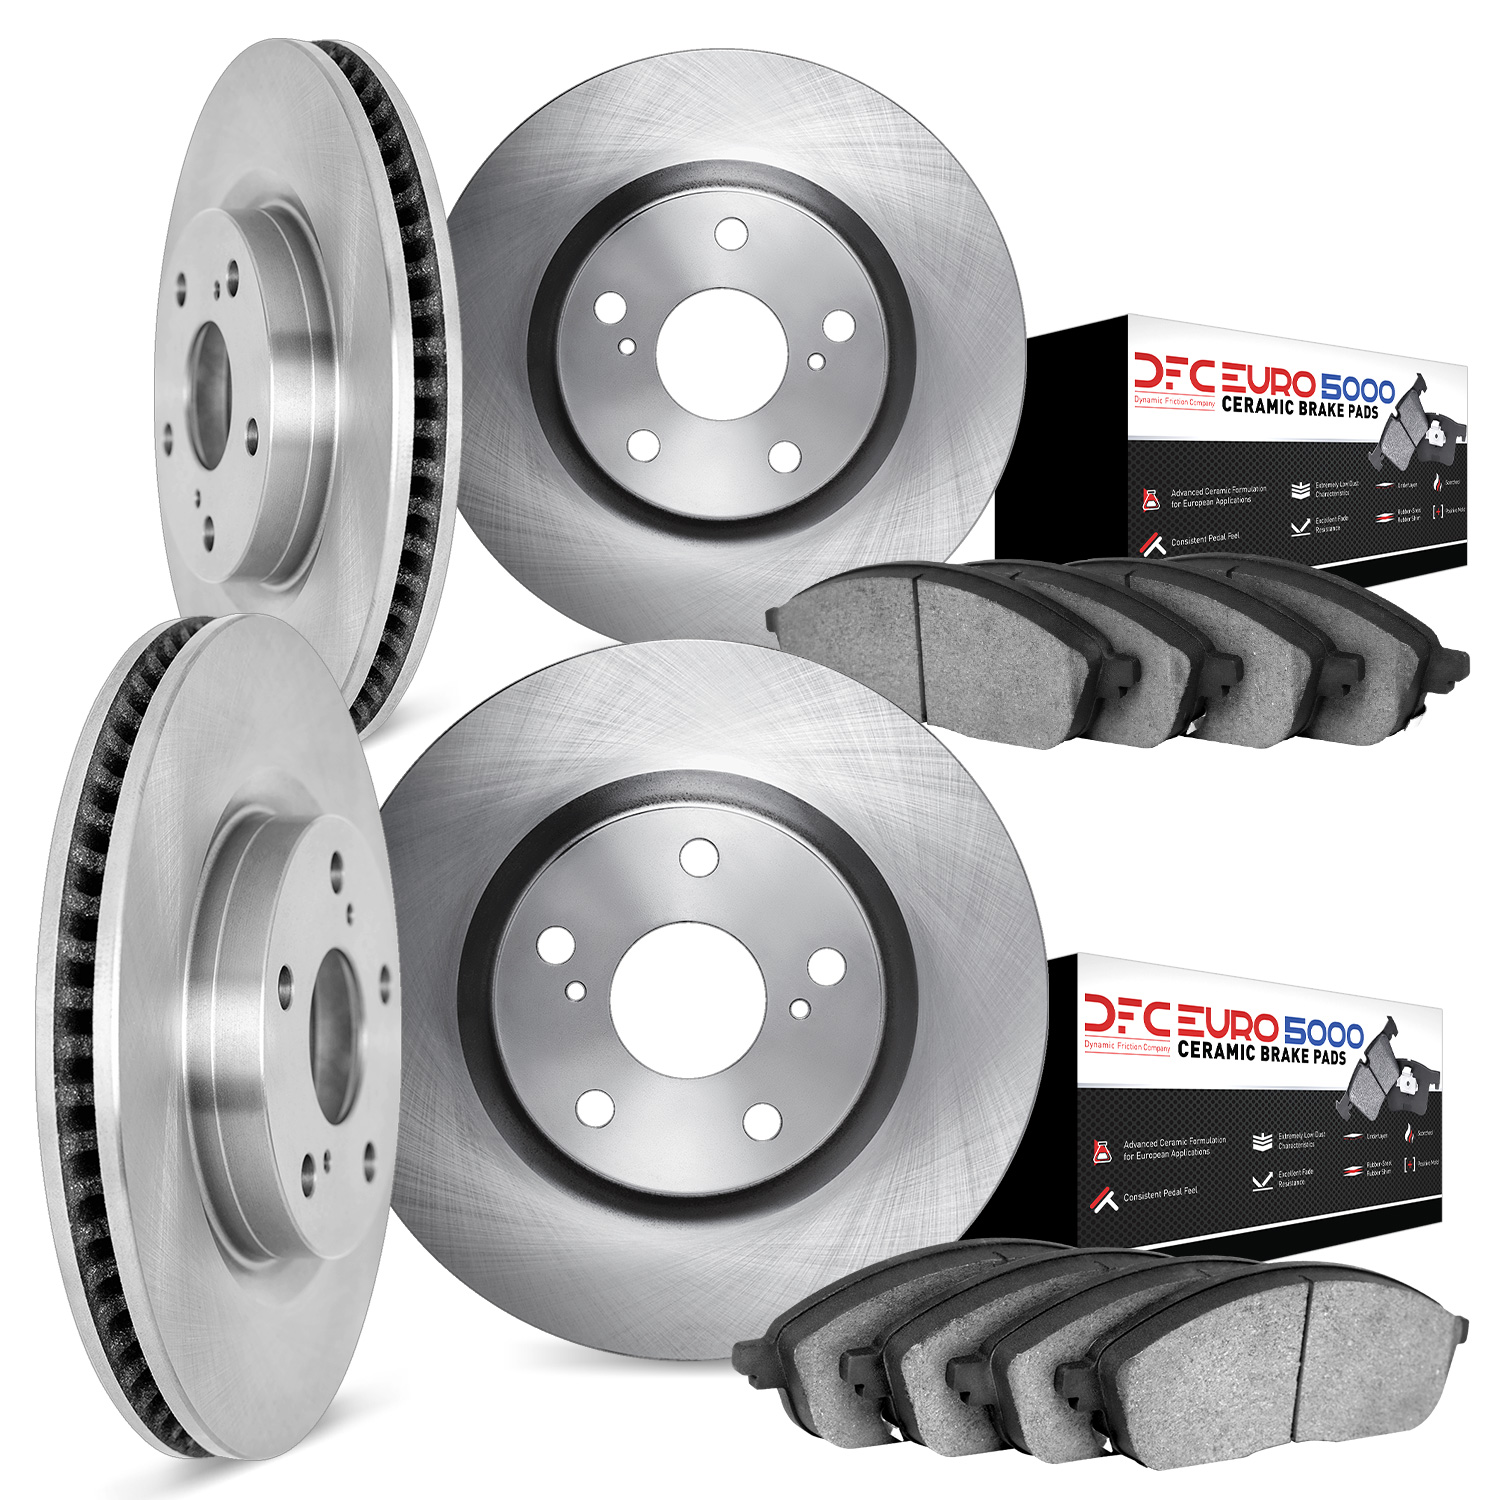 6604-31007 Brake Rotors w/5000 Euro Ceramic Brake Pads, 1994-1995 BMW, Position: Front and Rear